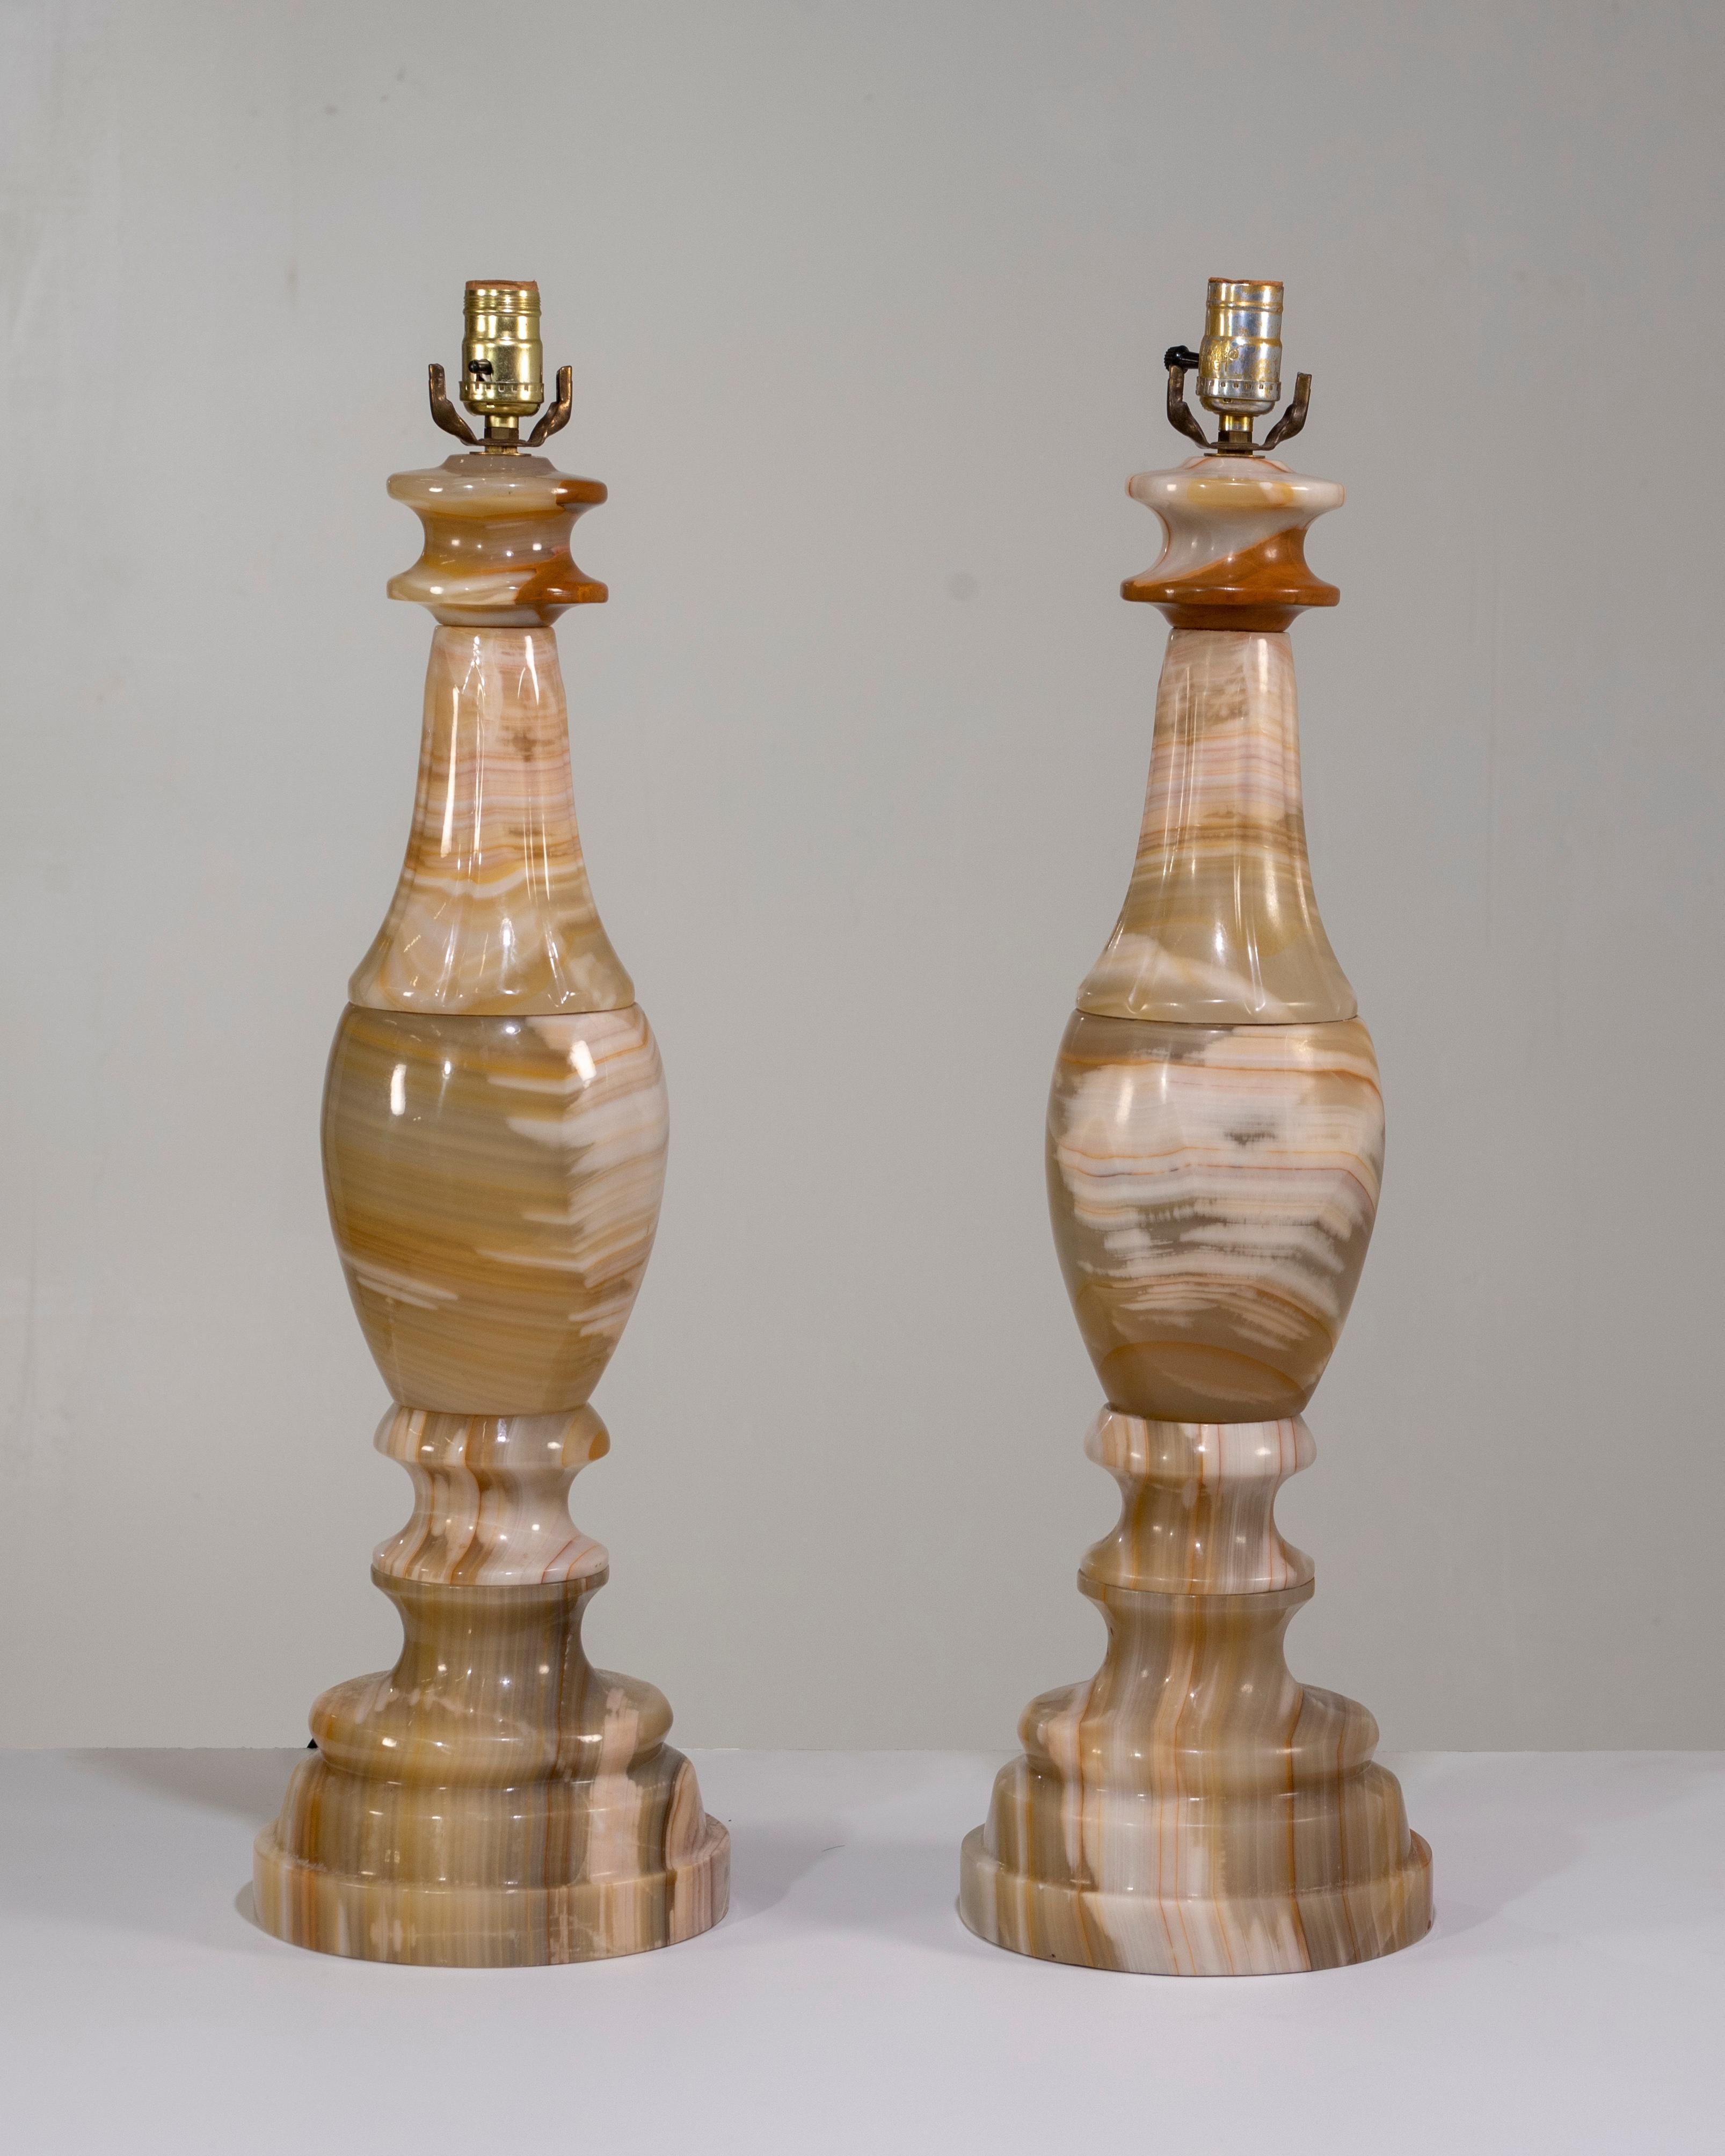 American Stunning Pair of Large Scale Neoclassical Onyx Table Lamps